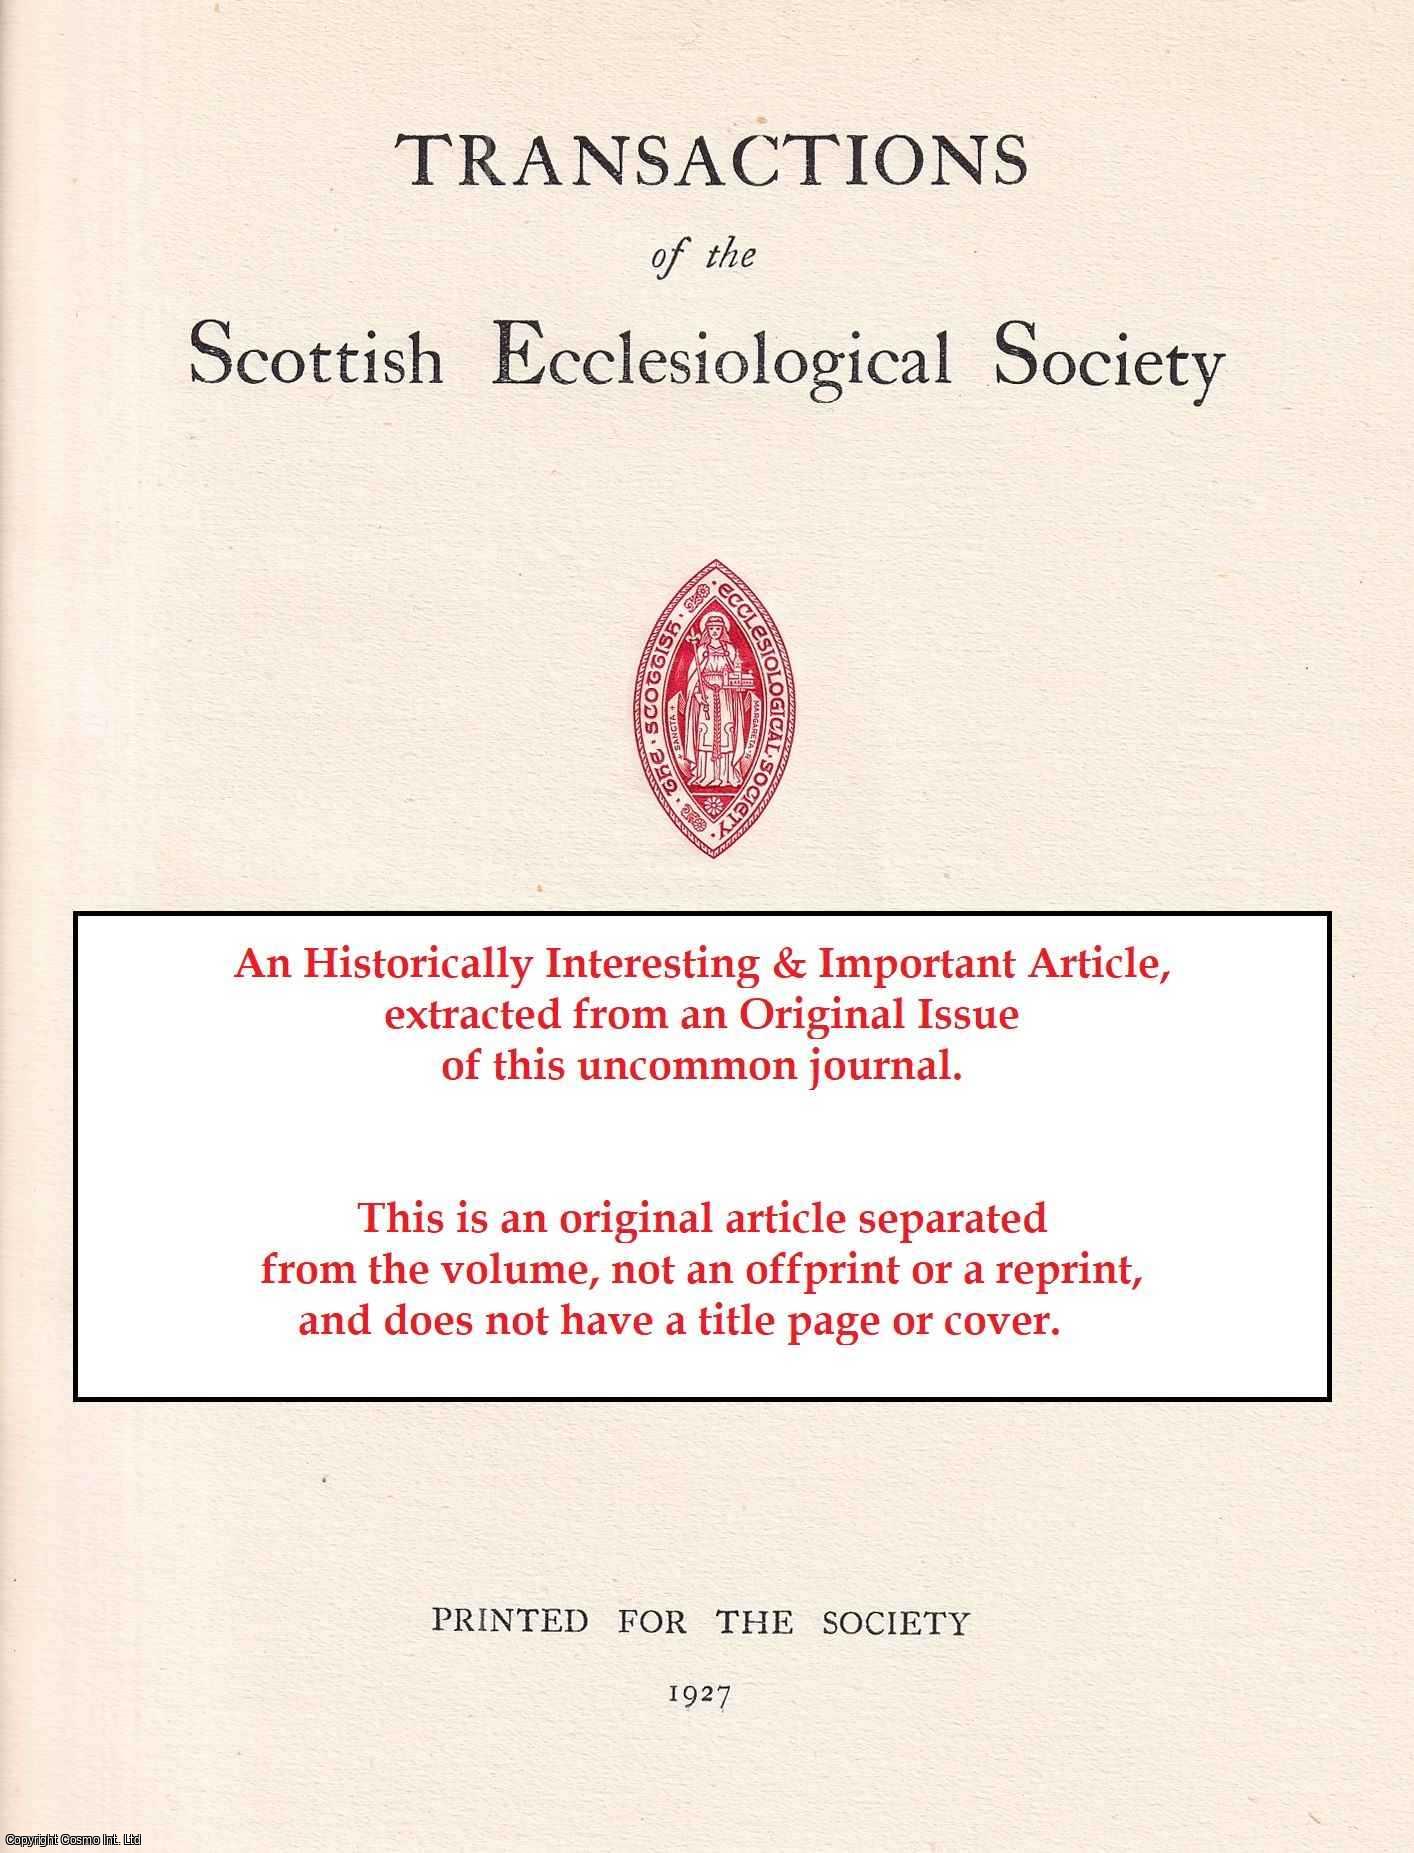 Rev A.A. Mackenzie - The Planning and the Use of the Sanctuary. An original article from the Transactions of the Scottish Ecclesiological Society, 1939.